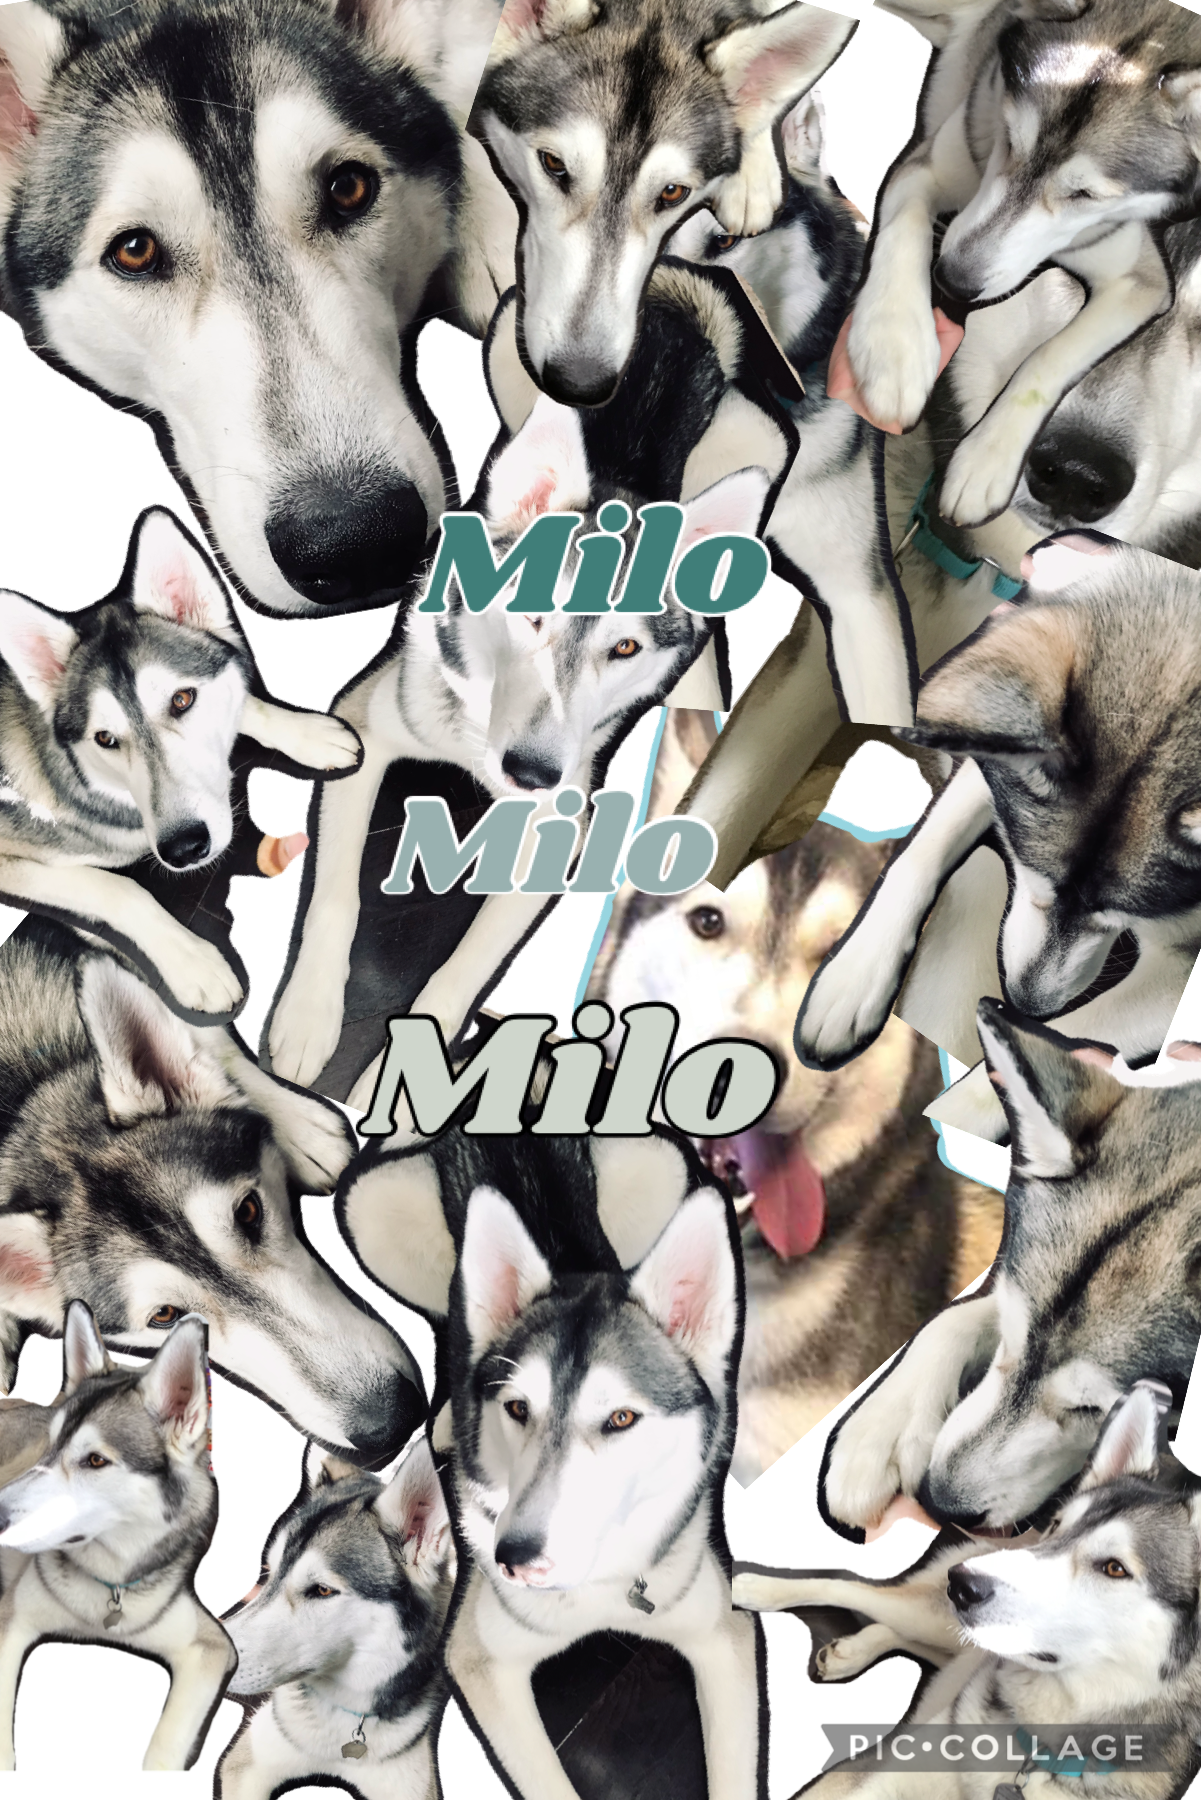          ✨tap✨
This is my dog milo I got home like last month he is a big trouble maker but so cute he is 16 month so one year and 7 years in dog years they say huskies are not food lovers milo is all about food